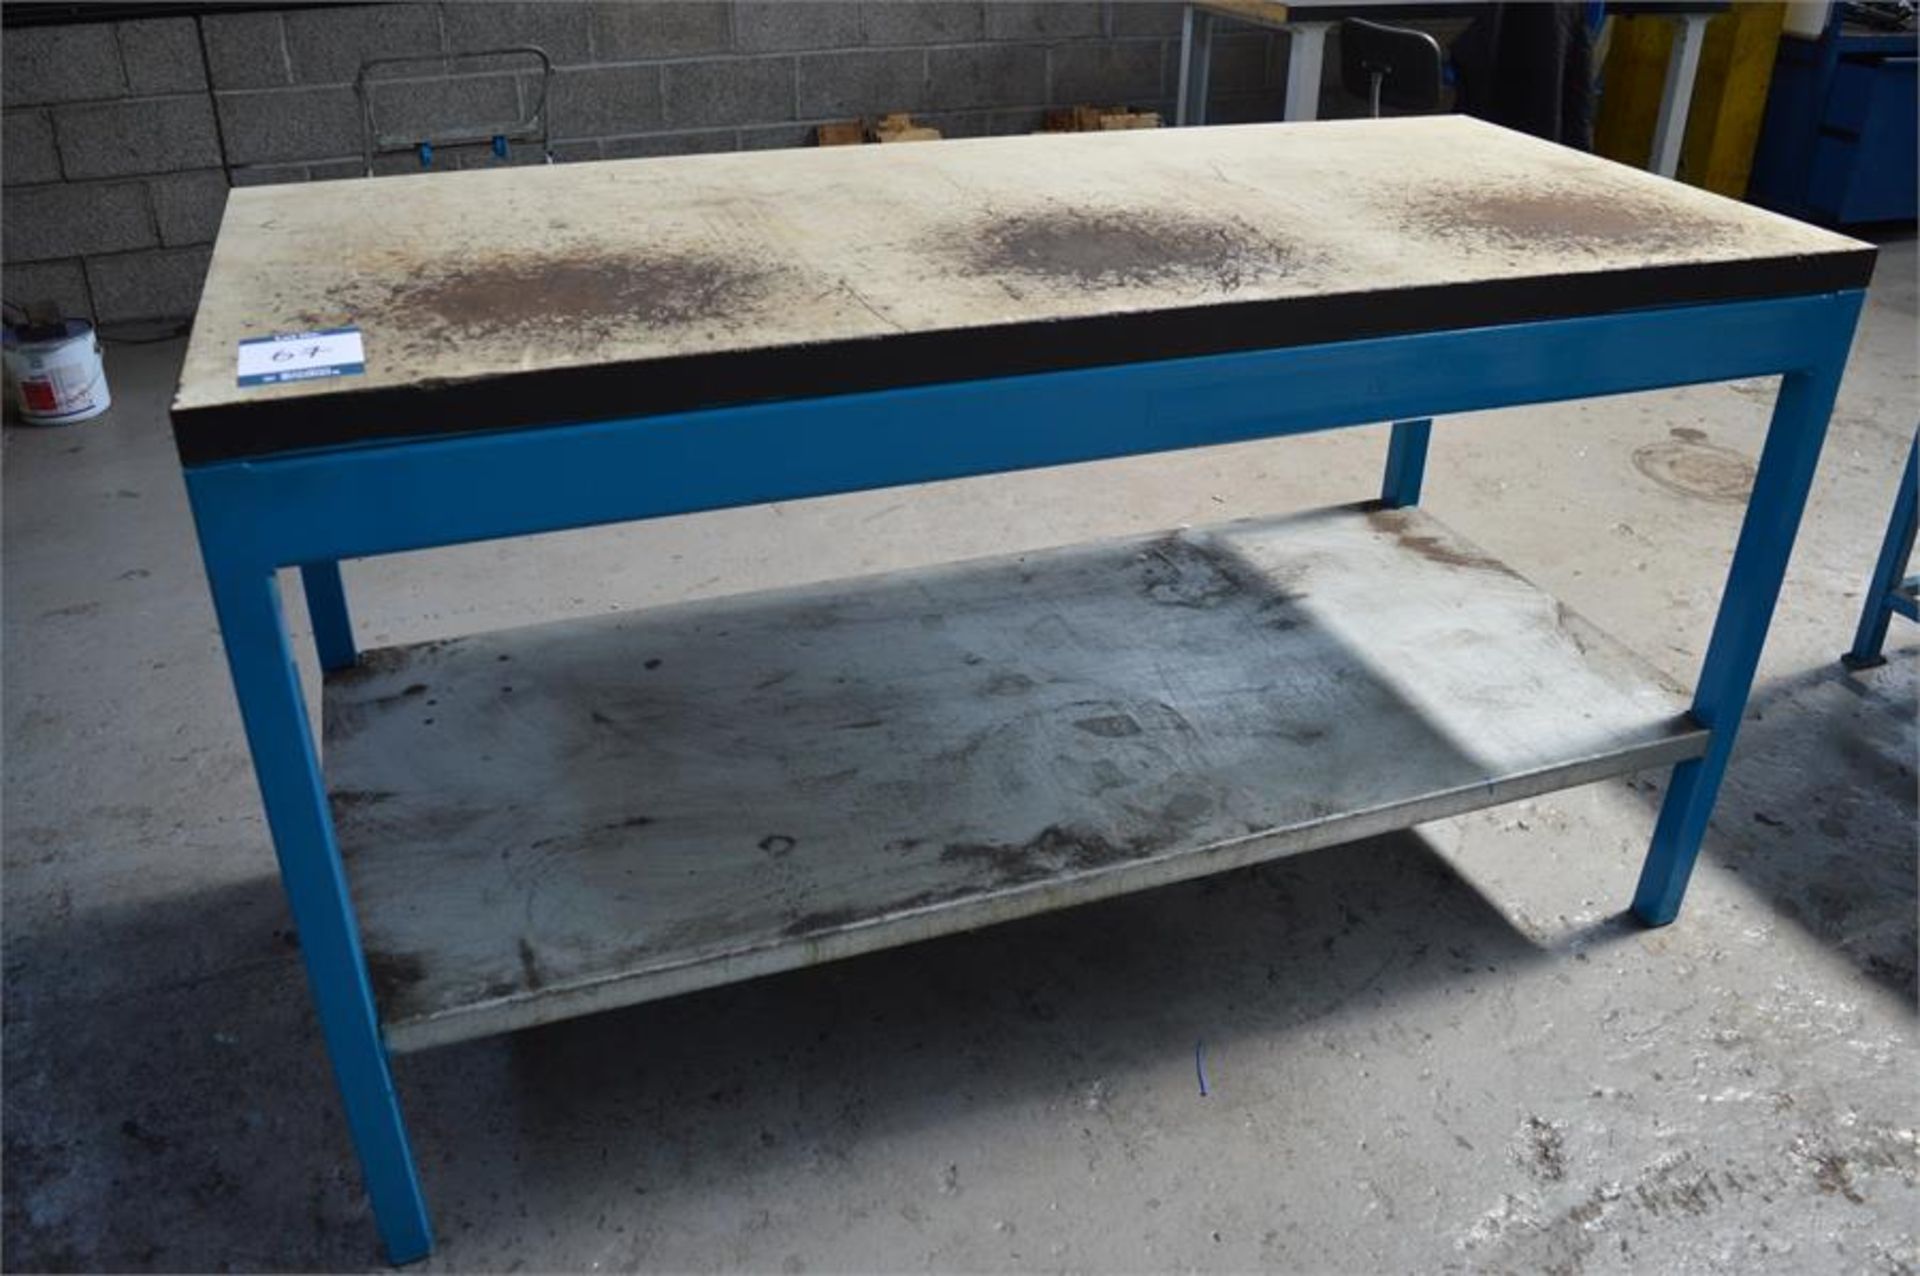 2 x steel workbenches with shelves, both 80cm x 180cm x 100cm (h)